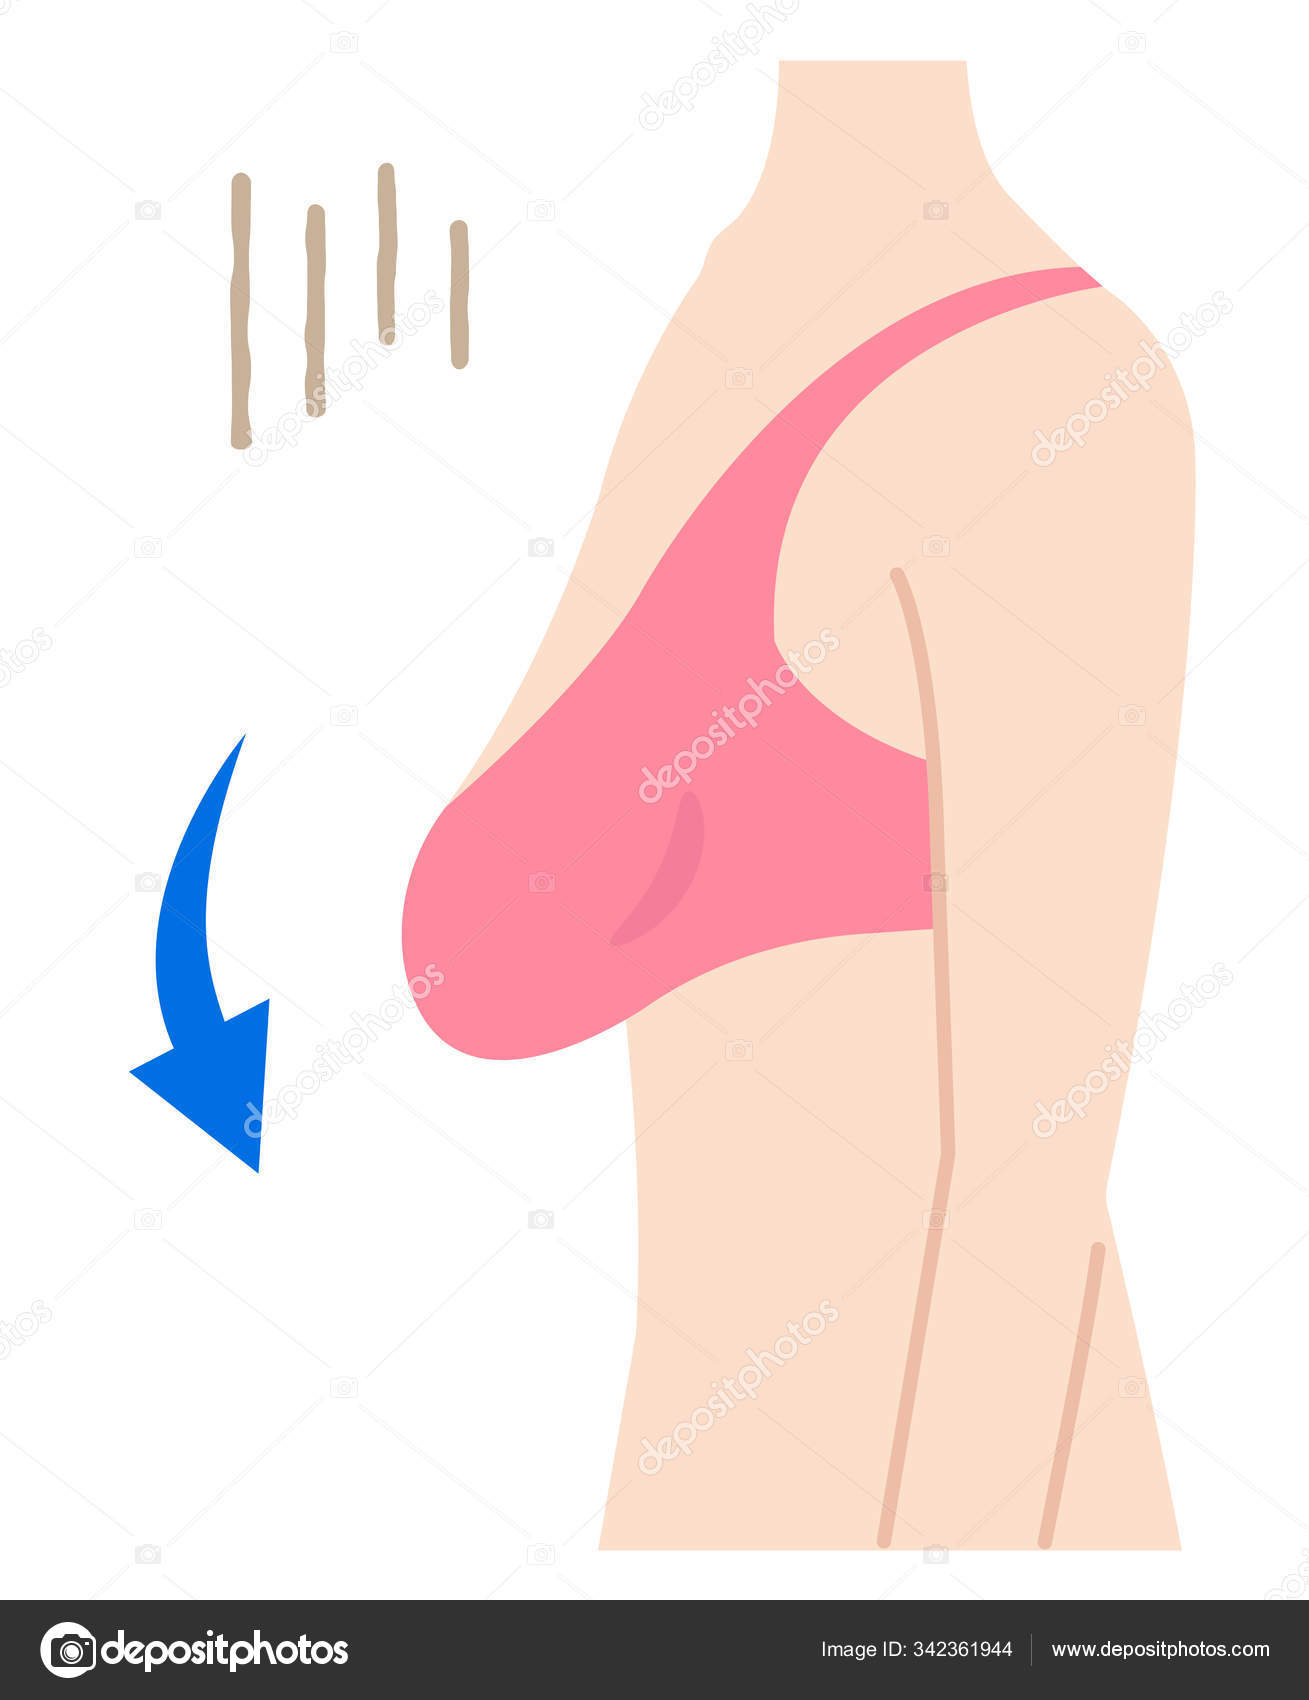 Sagging Breasts Womans Body Illustration Beauty Body Health Care